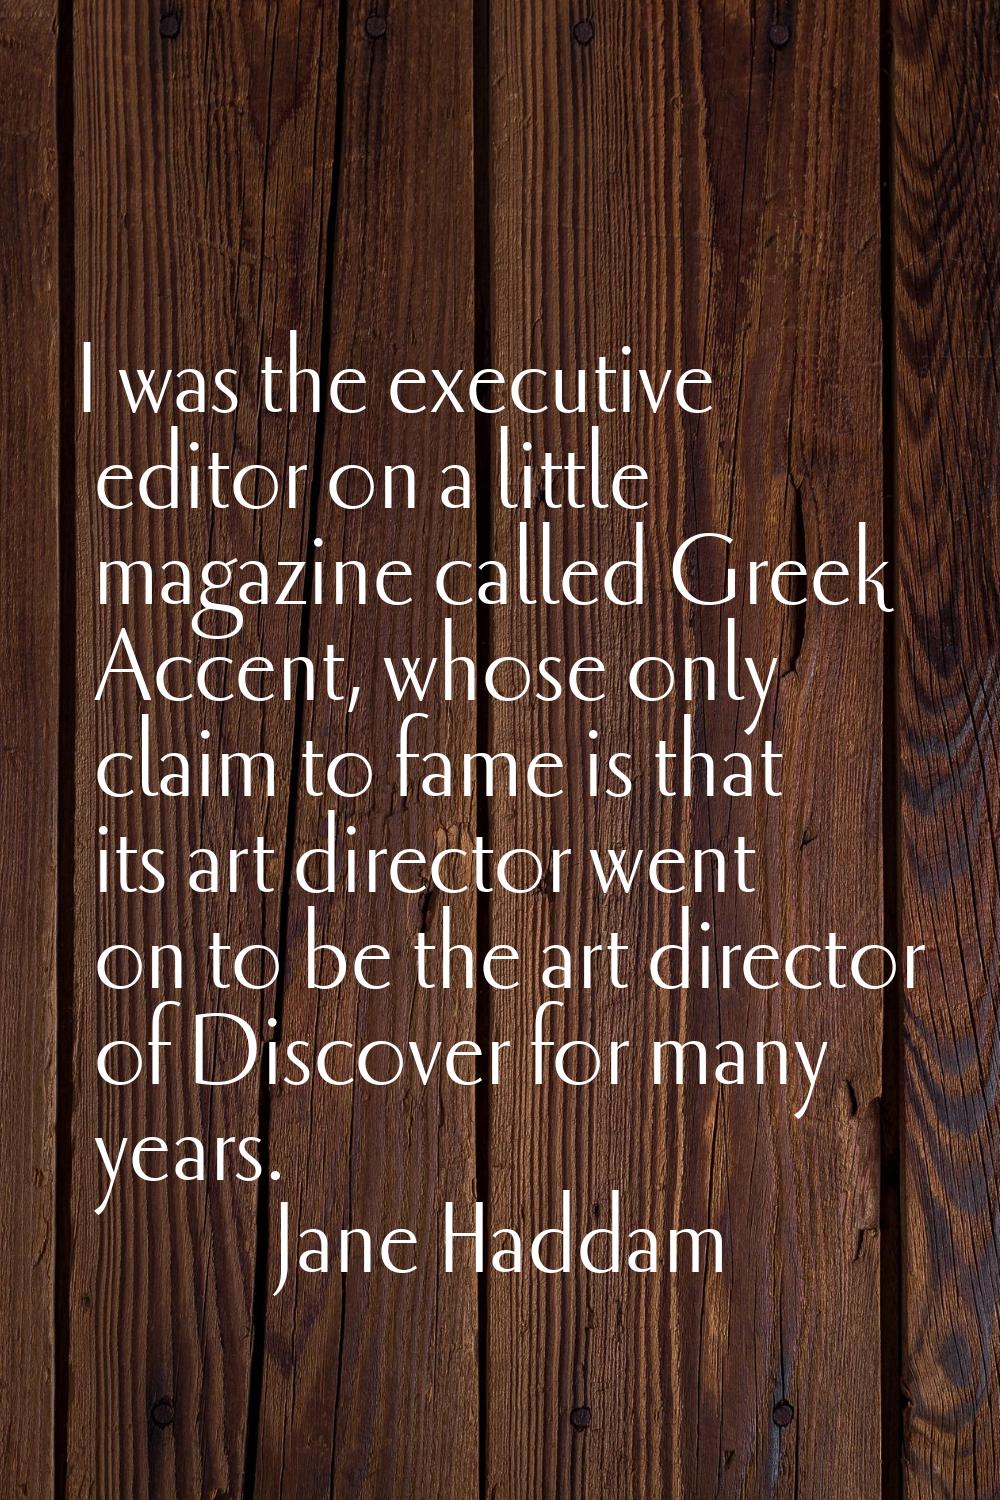 I was the executive editor on a little magazine called Greek Accent, whose only claim to fame is th